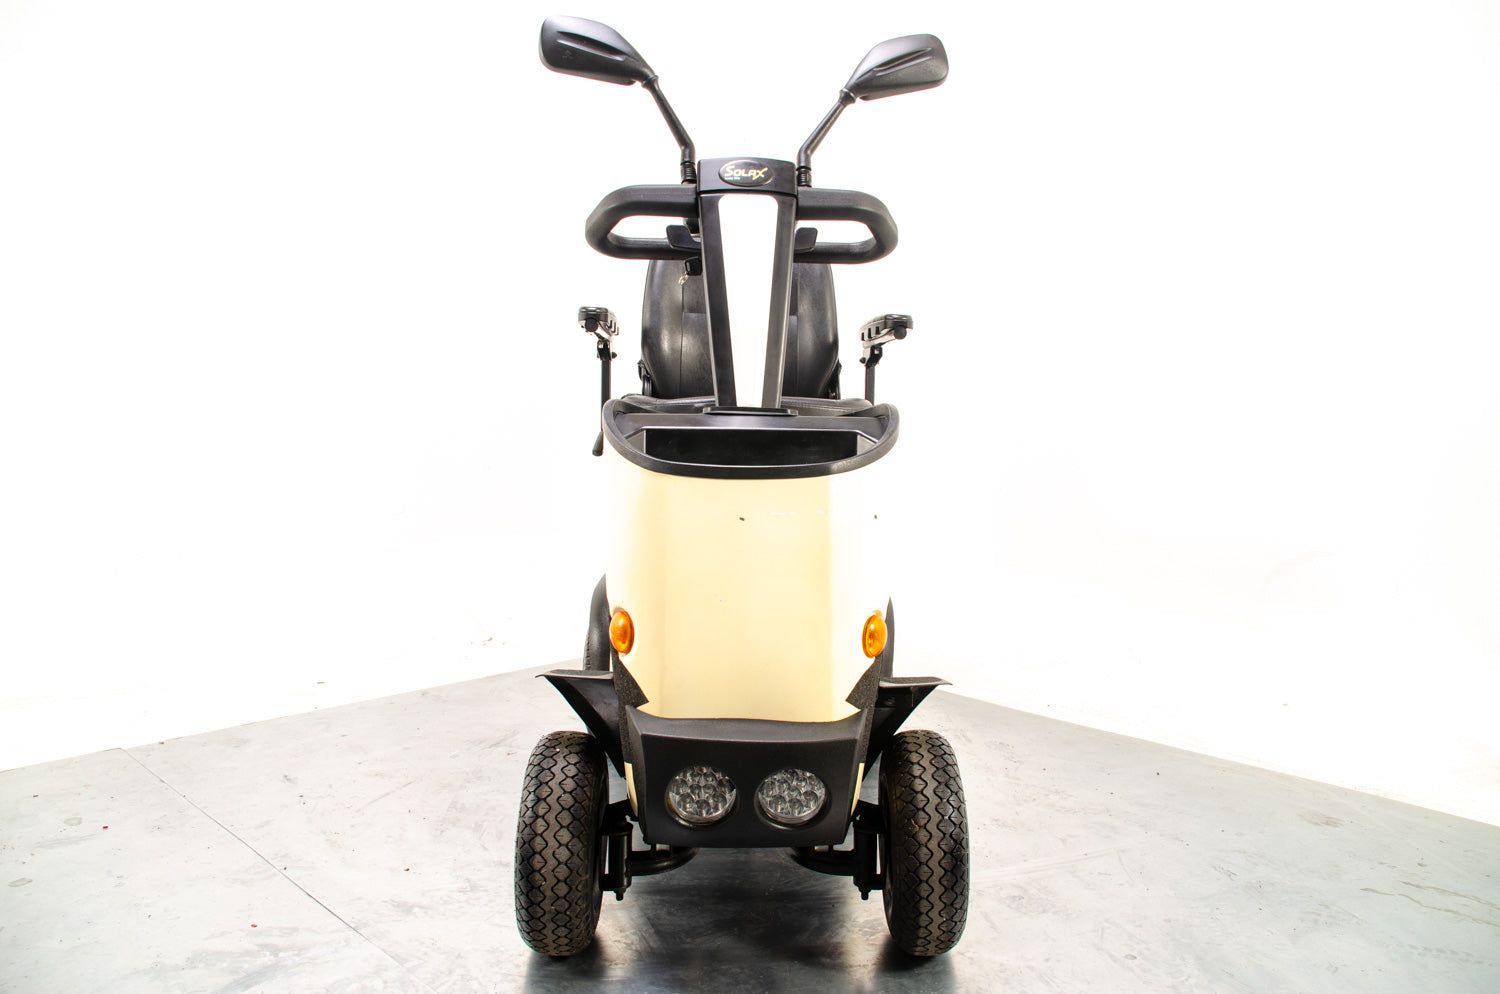 2014 Solax Buggie from Monarch 6mph Midsize Mobility Scooter in Cream White